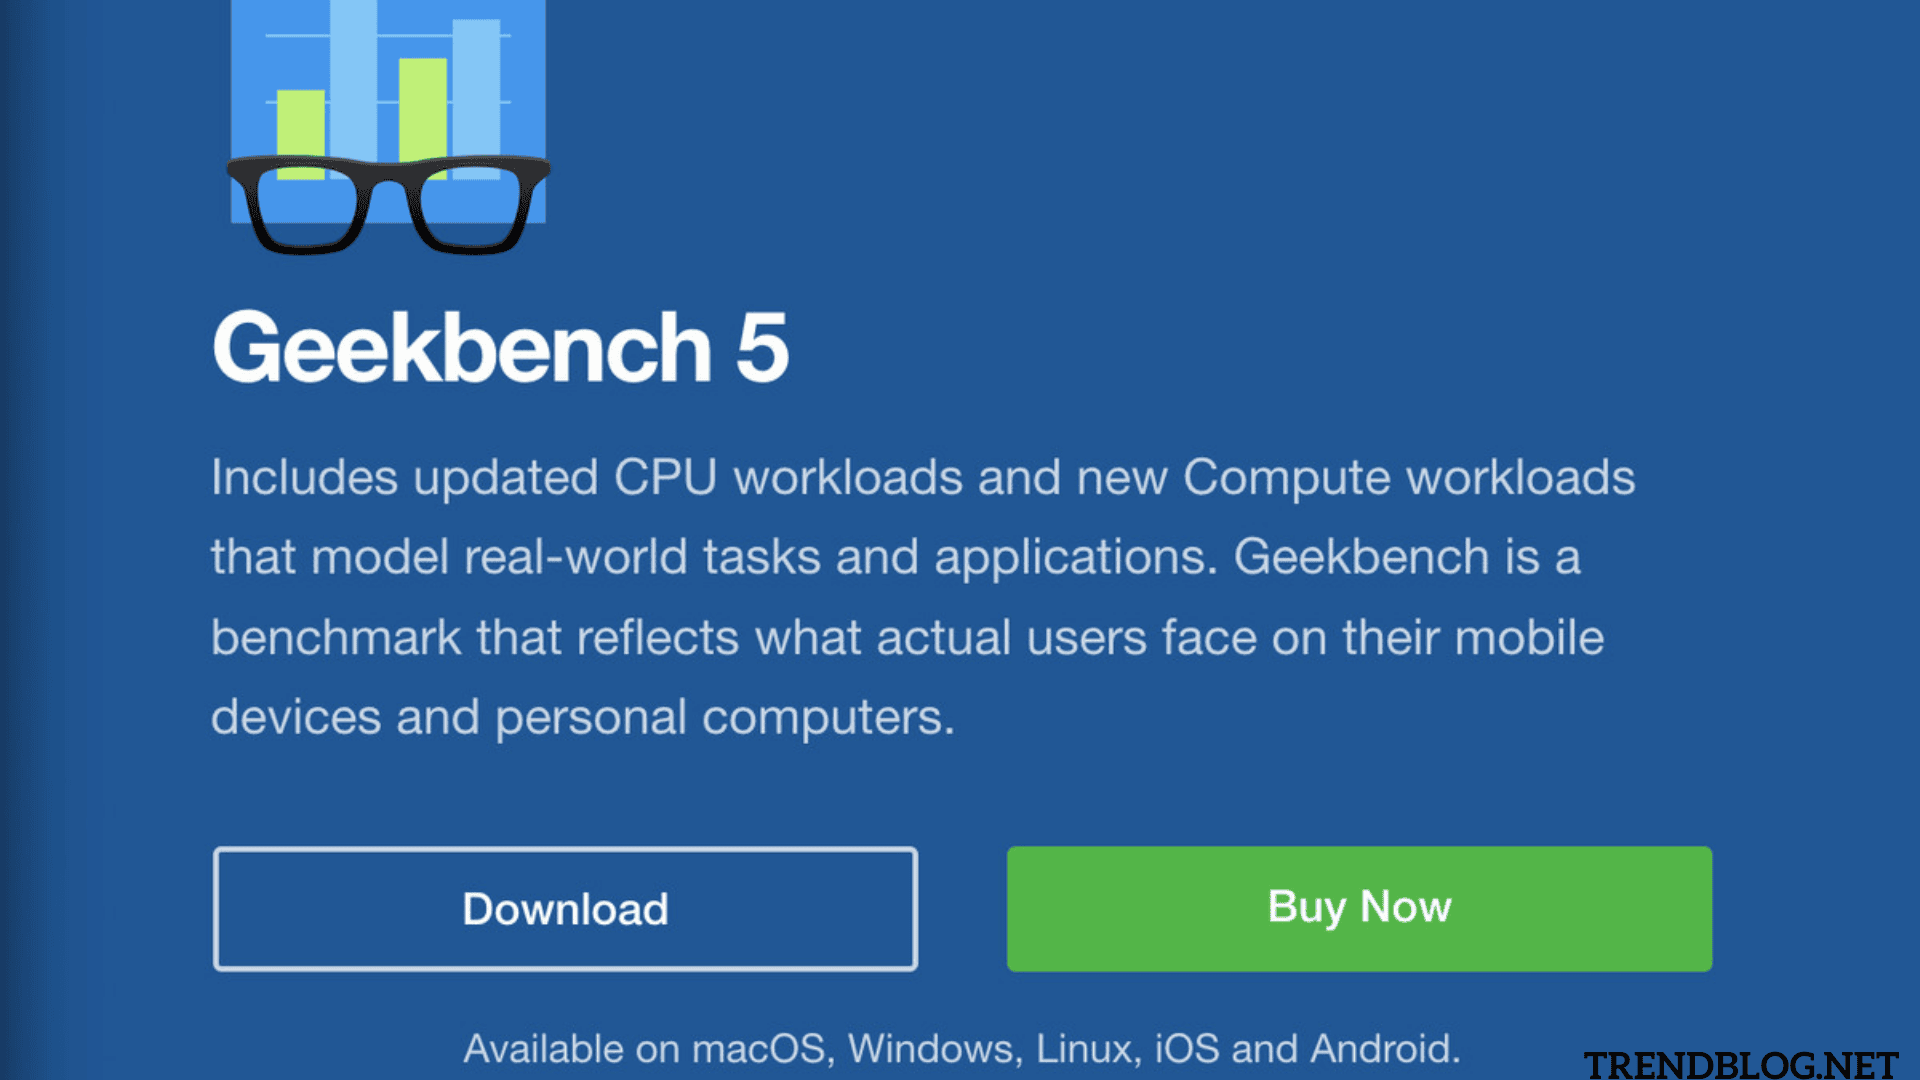  How to Run Geekbench on Your Phone or Computer